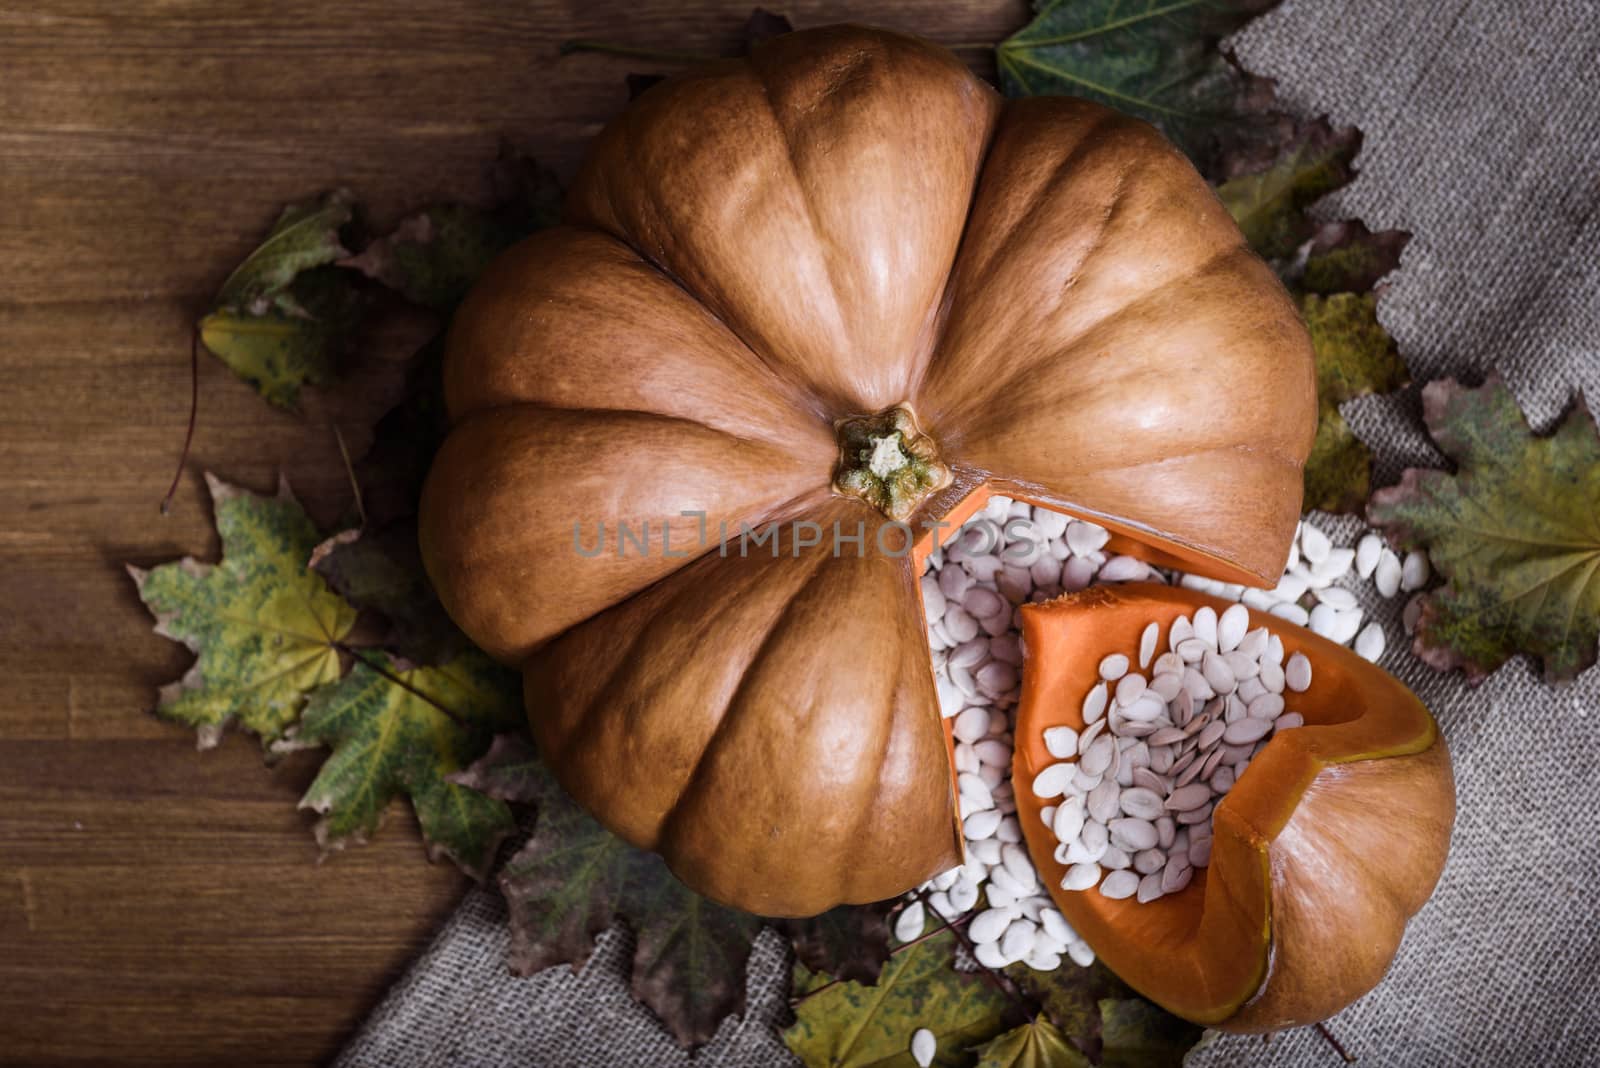 pumpkin lying on a wooden table by Andreua